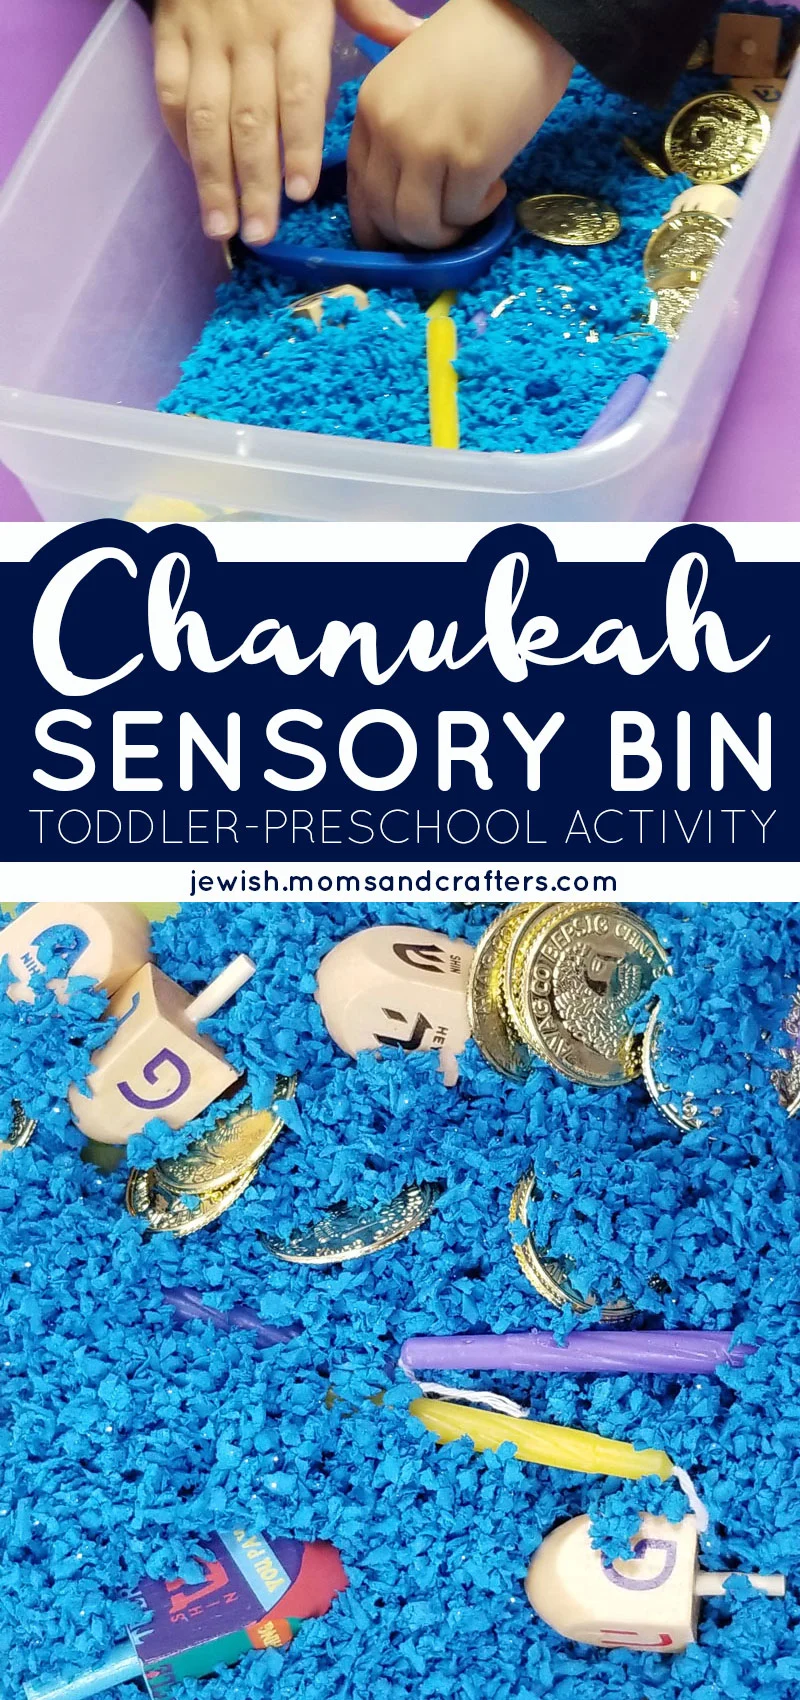 Click for one of my favorite preschool activities for Hanukkah - a unique Chanukah sensory bin! This is a fun toddler activity for two years old and up, featuring dreidels, candles, and more!